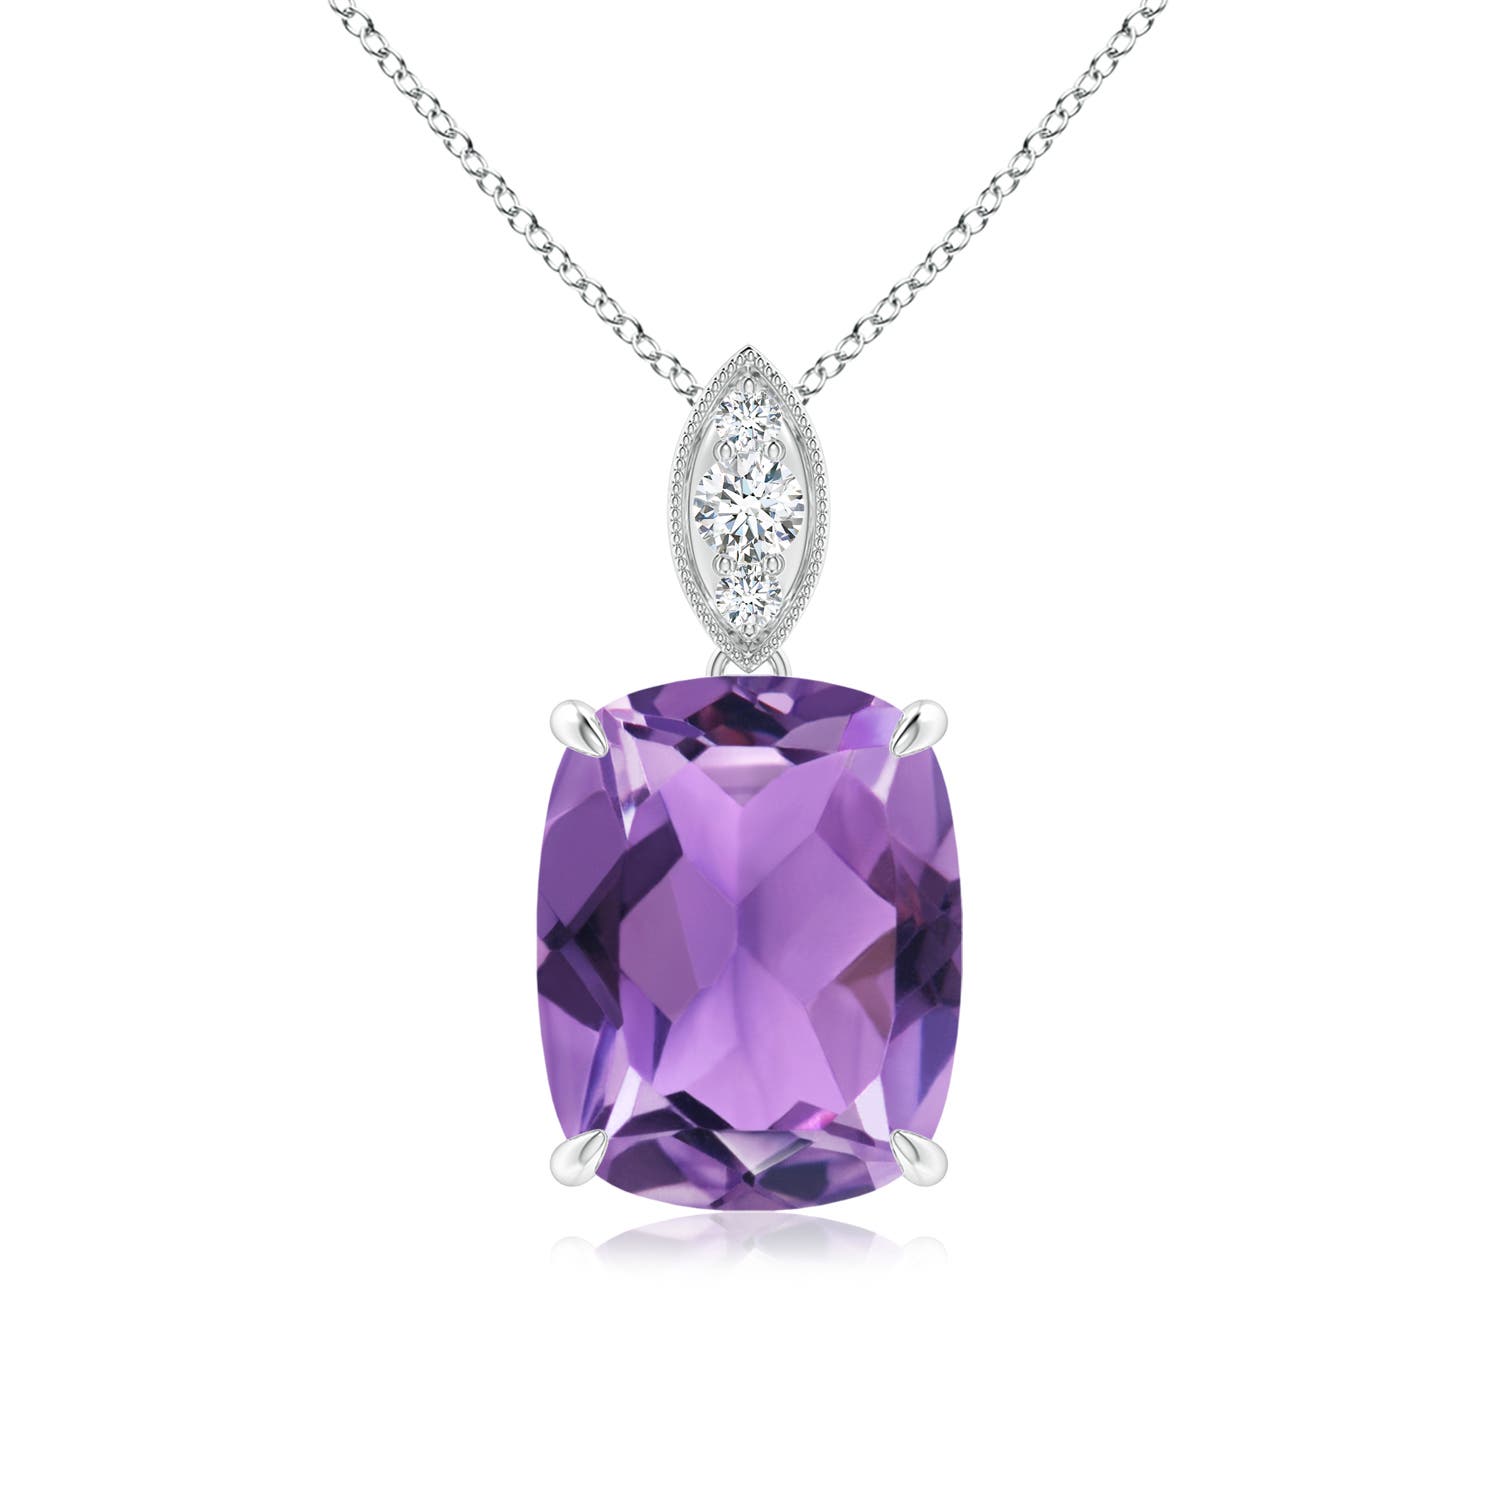 AA - Amethyst / 2.75 CT / 14 KT White Gold